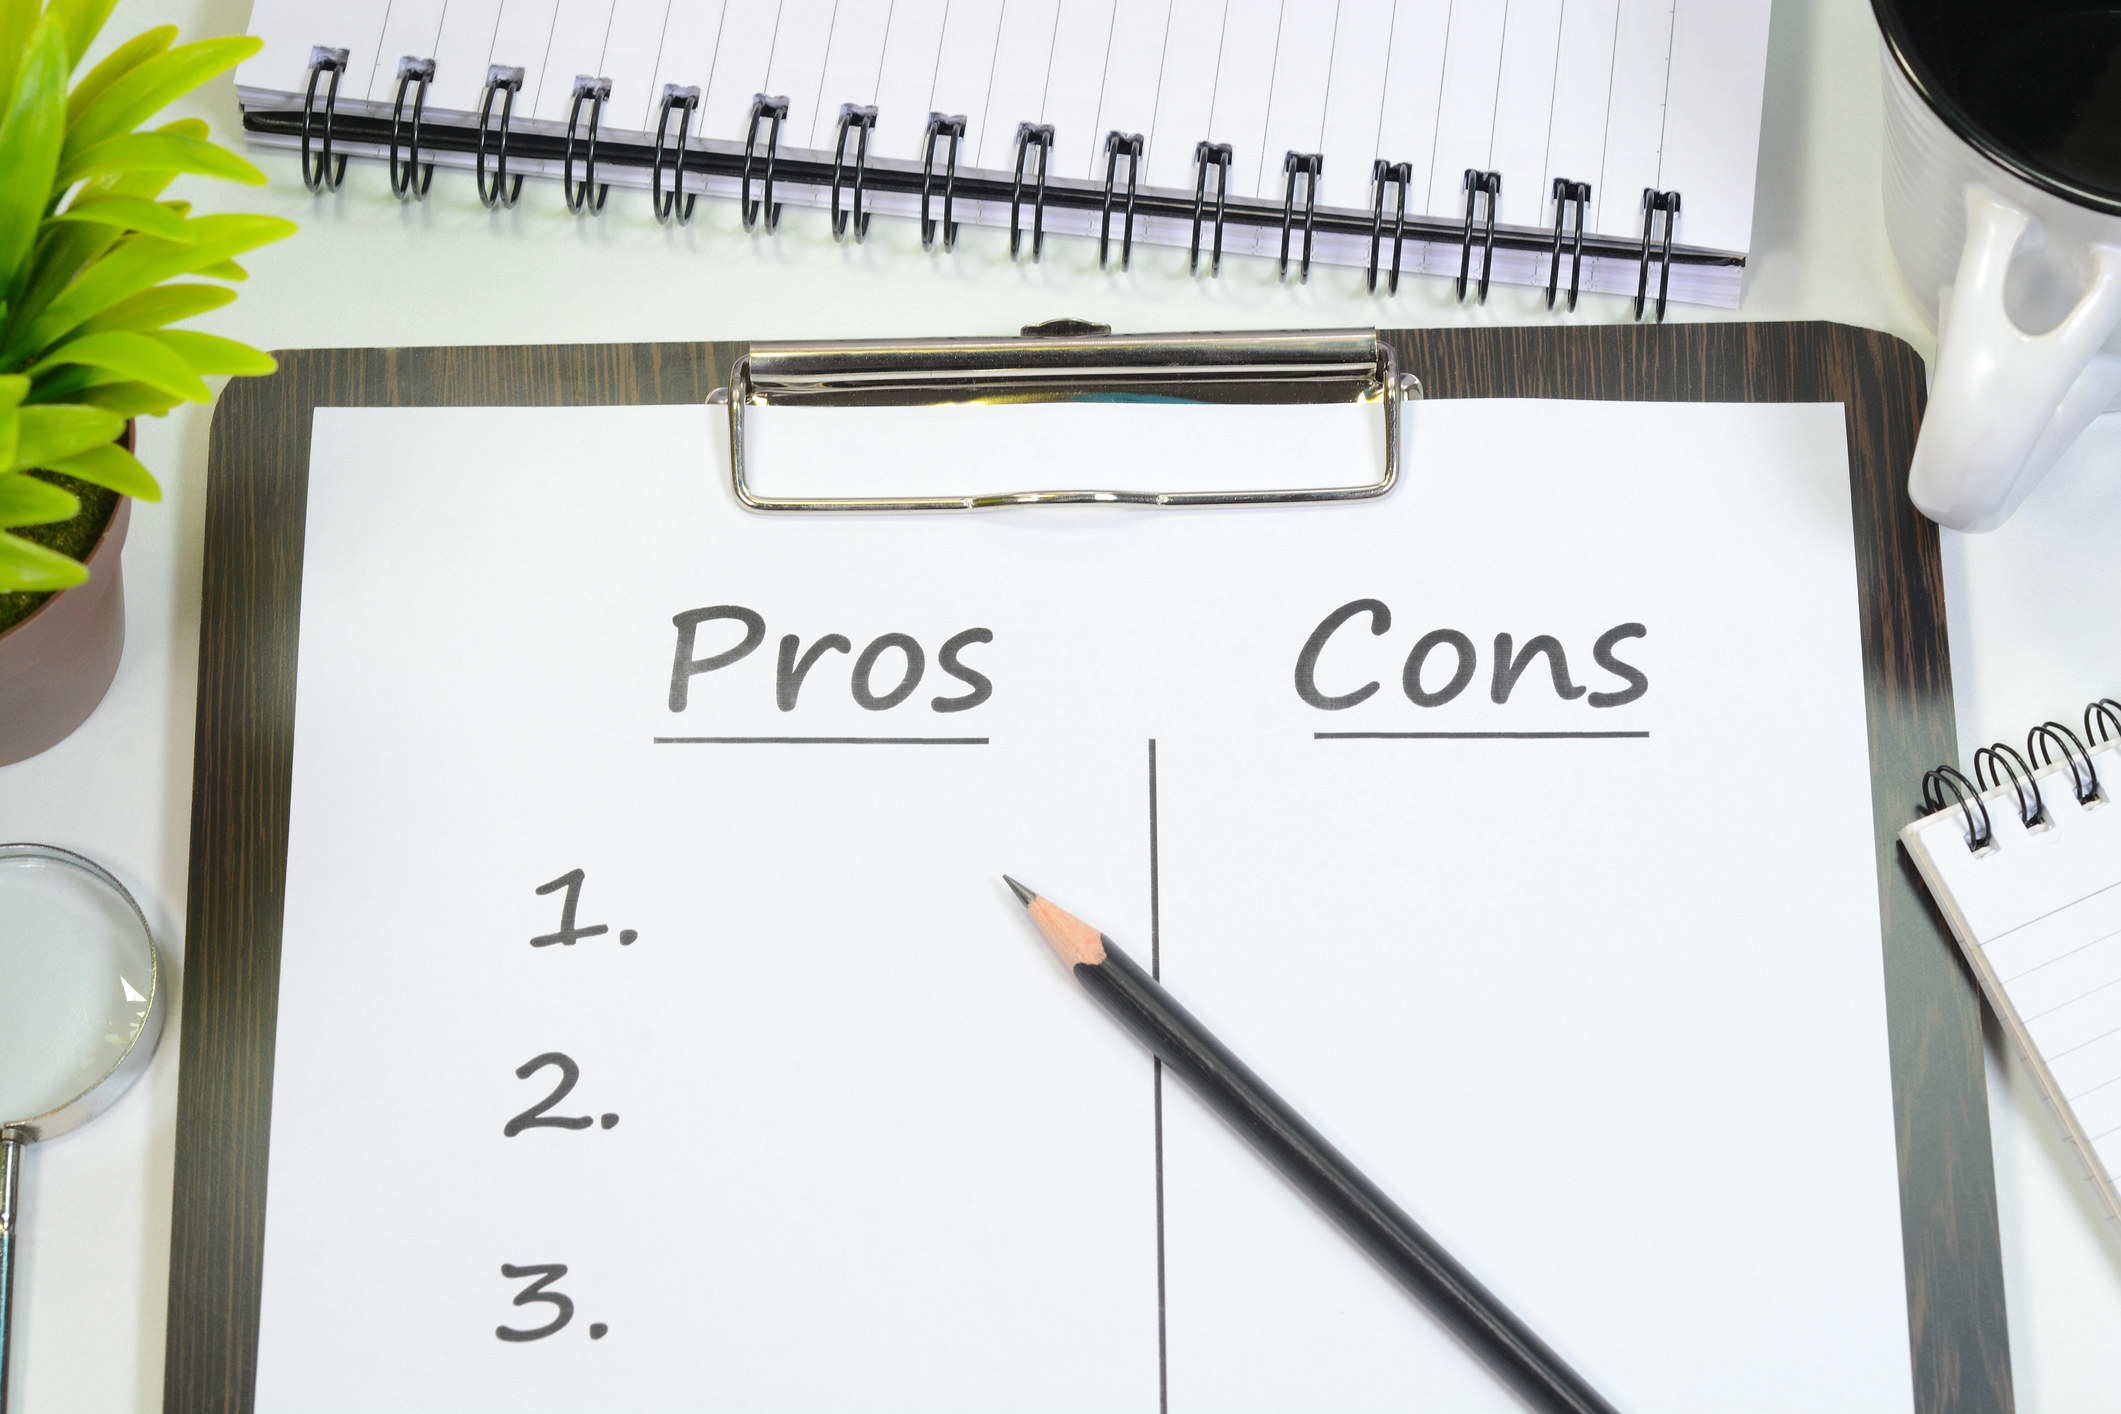 A pros and cons list on a table